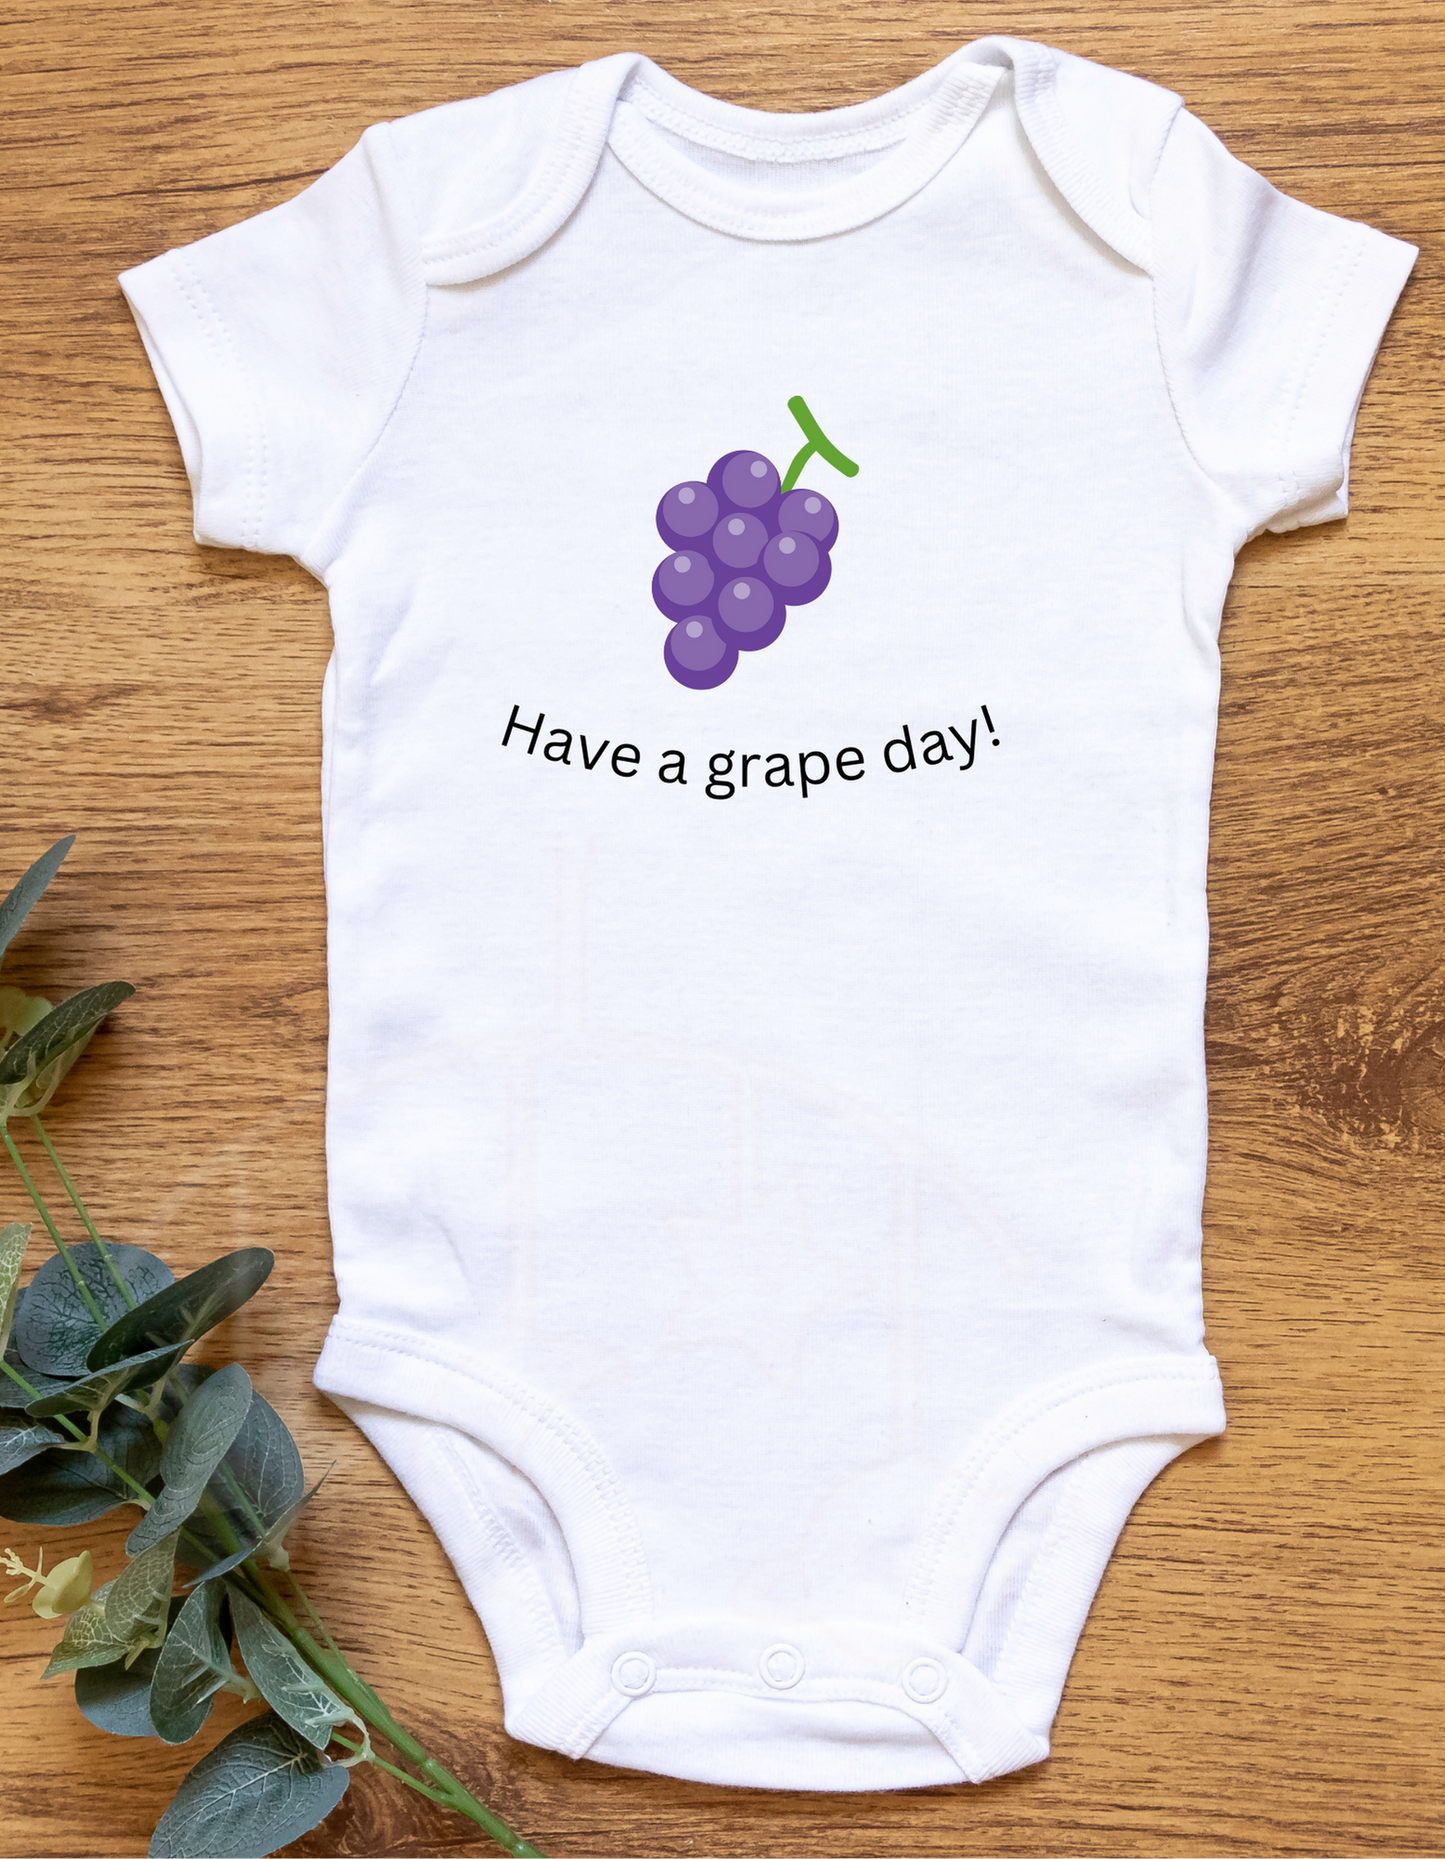 White onesie that says have a grape day and has an image of a bunch of grapes on a wood background with green leaves.